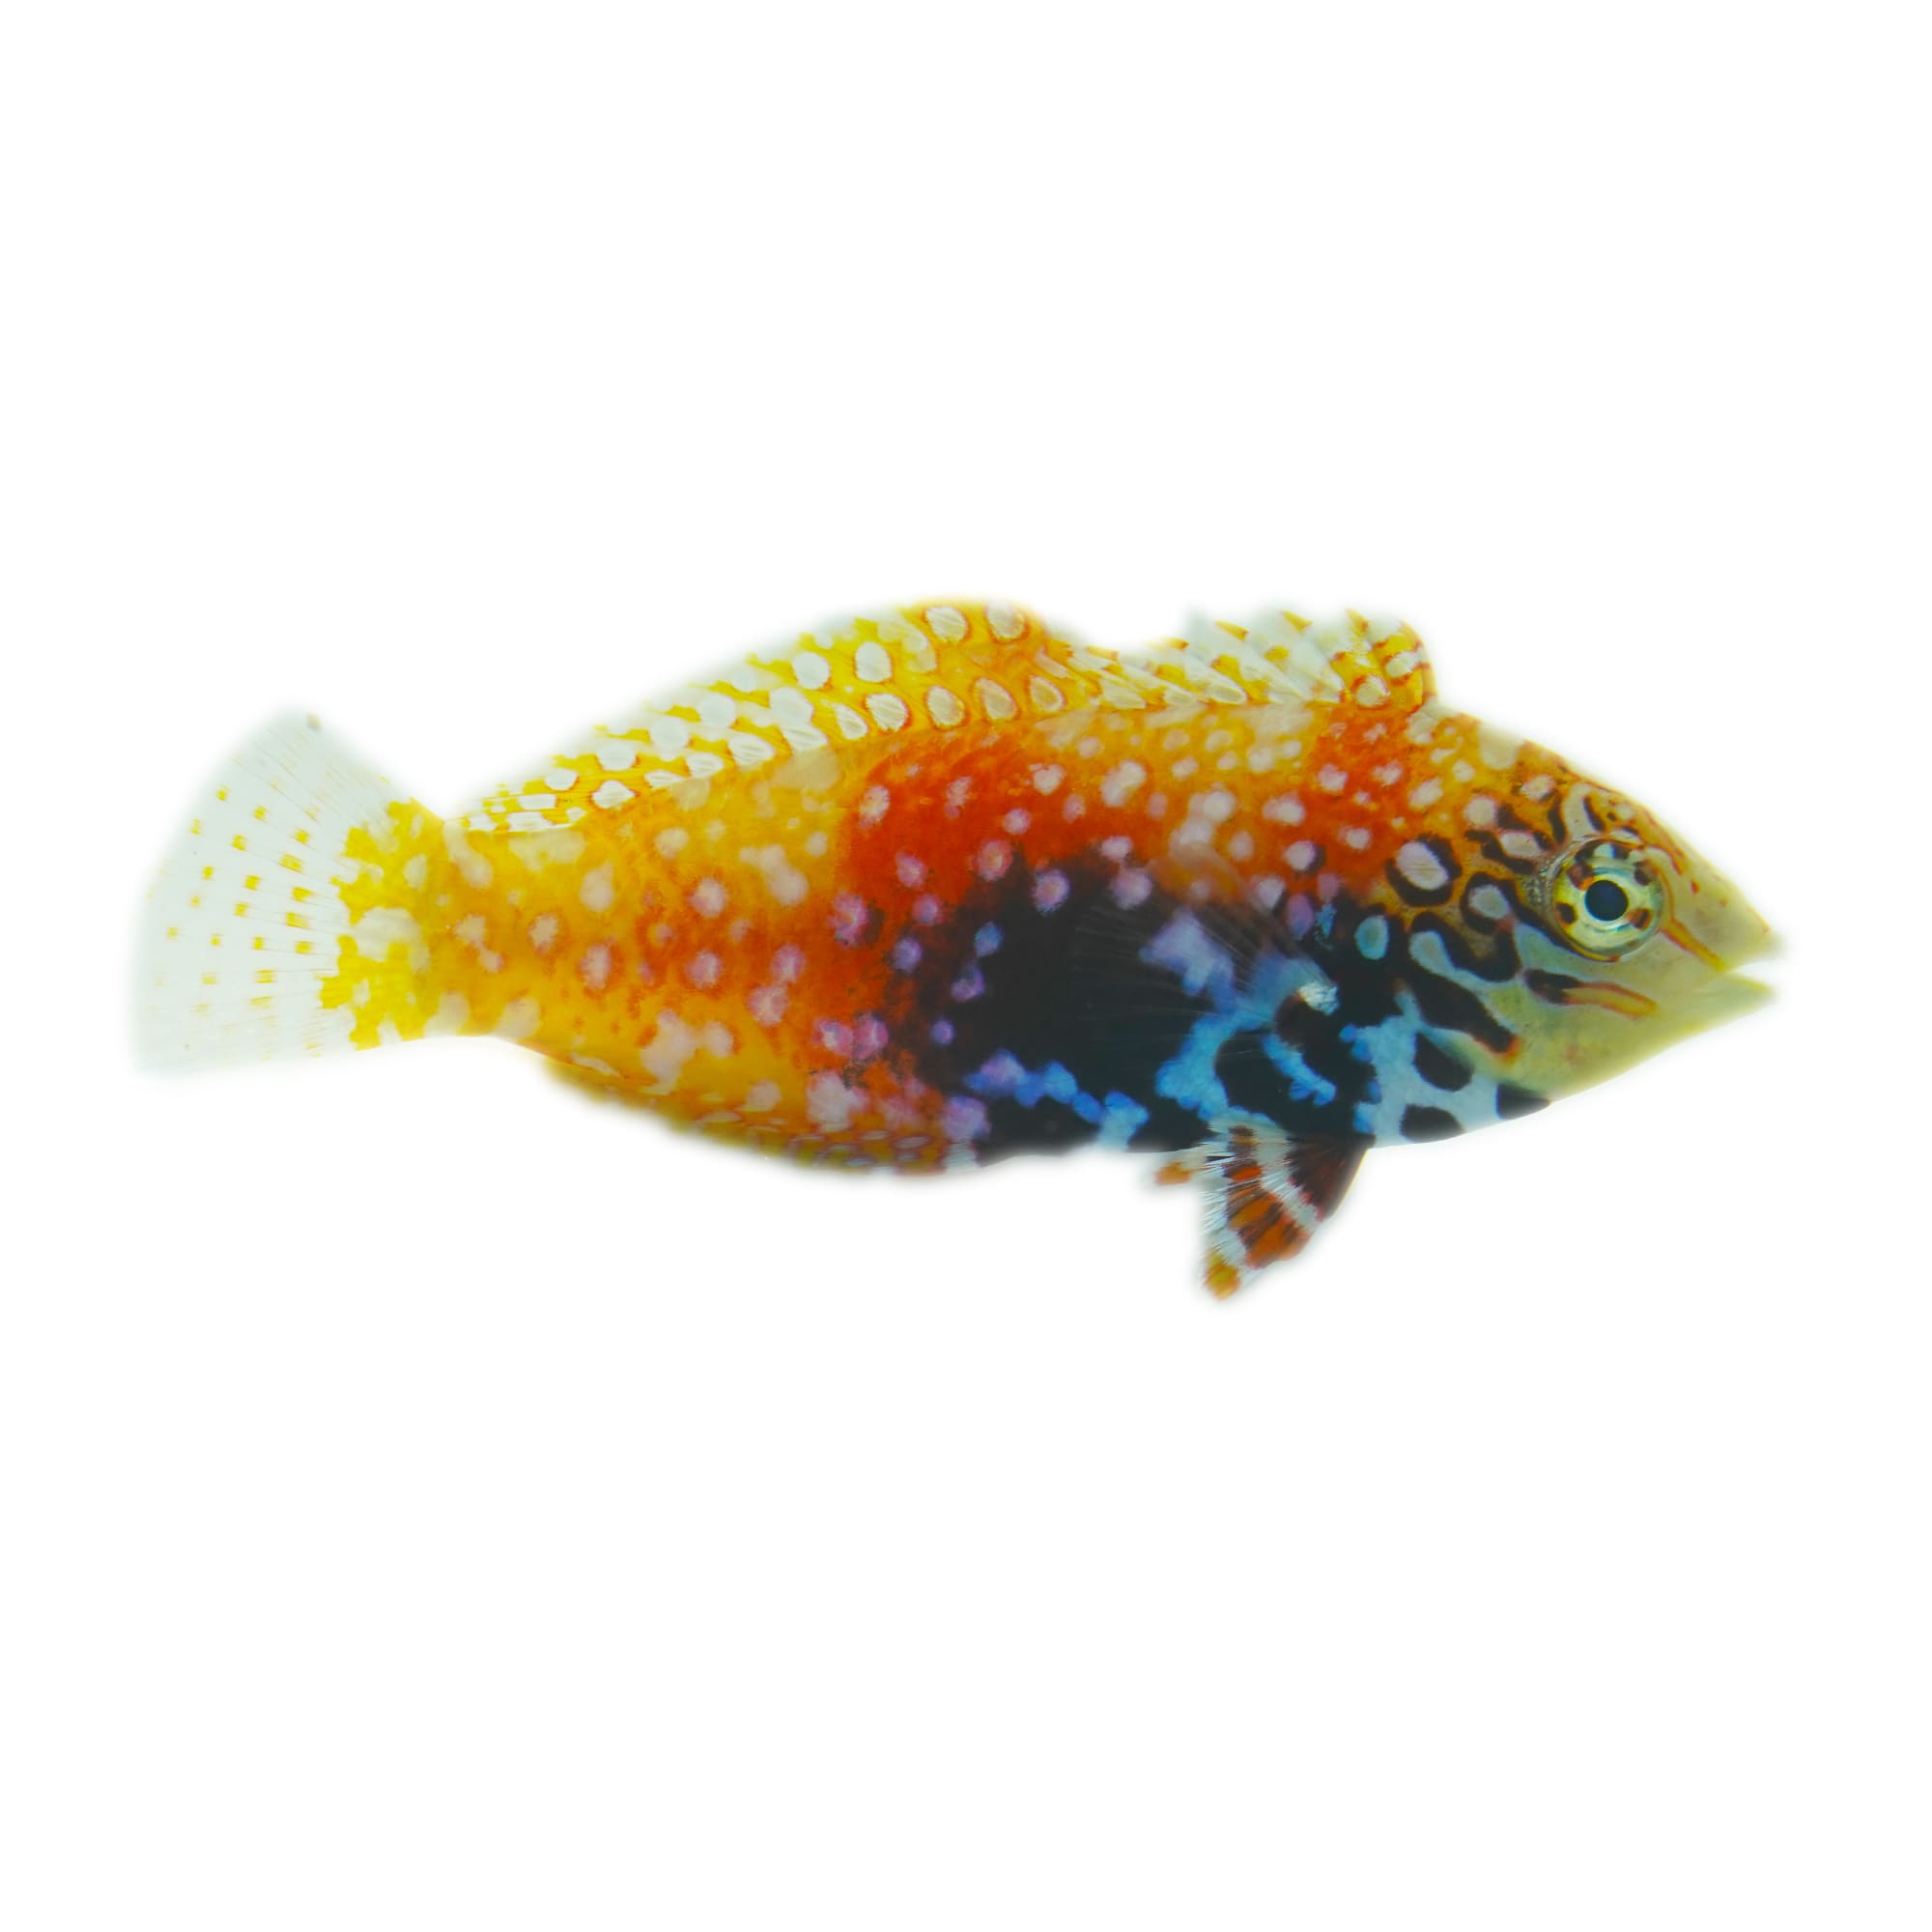 Blue Star Leopard Wrasse For Sale - Small Female